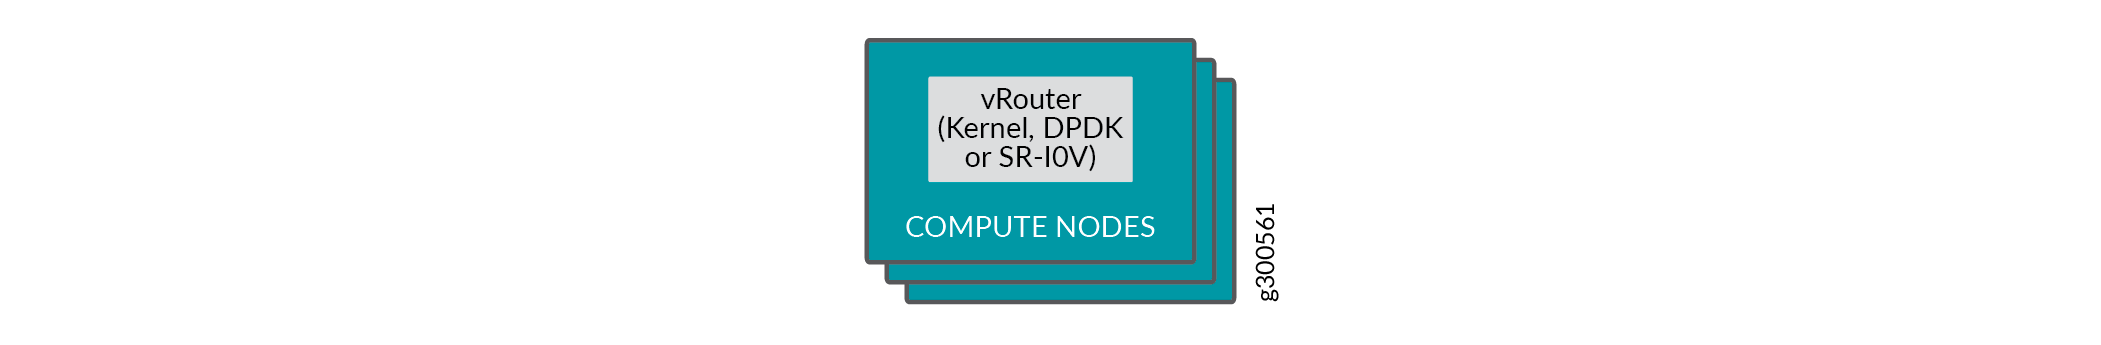 vRouter Summary—Compute Nodes